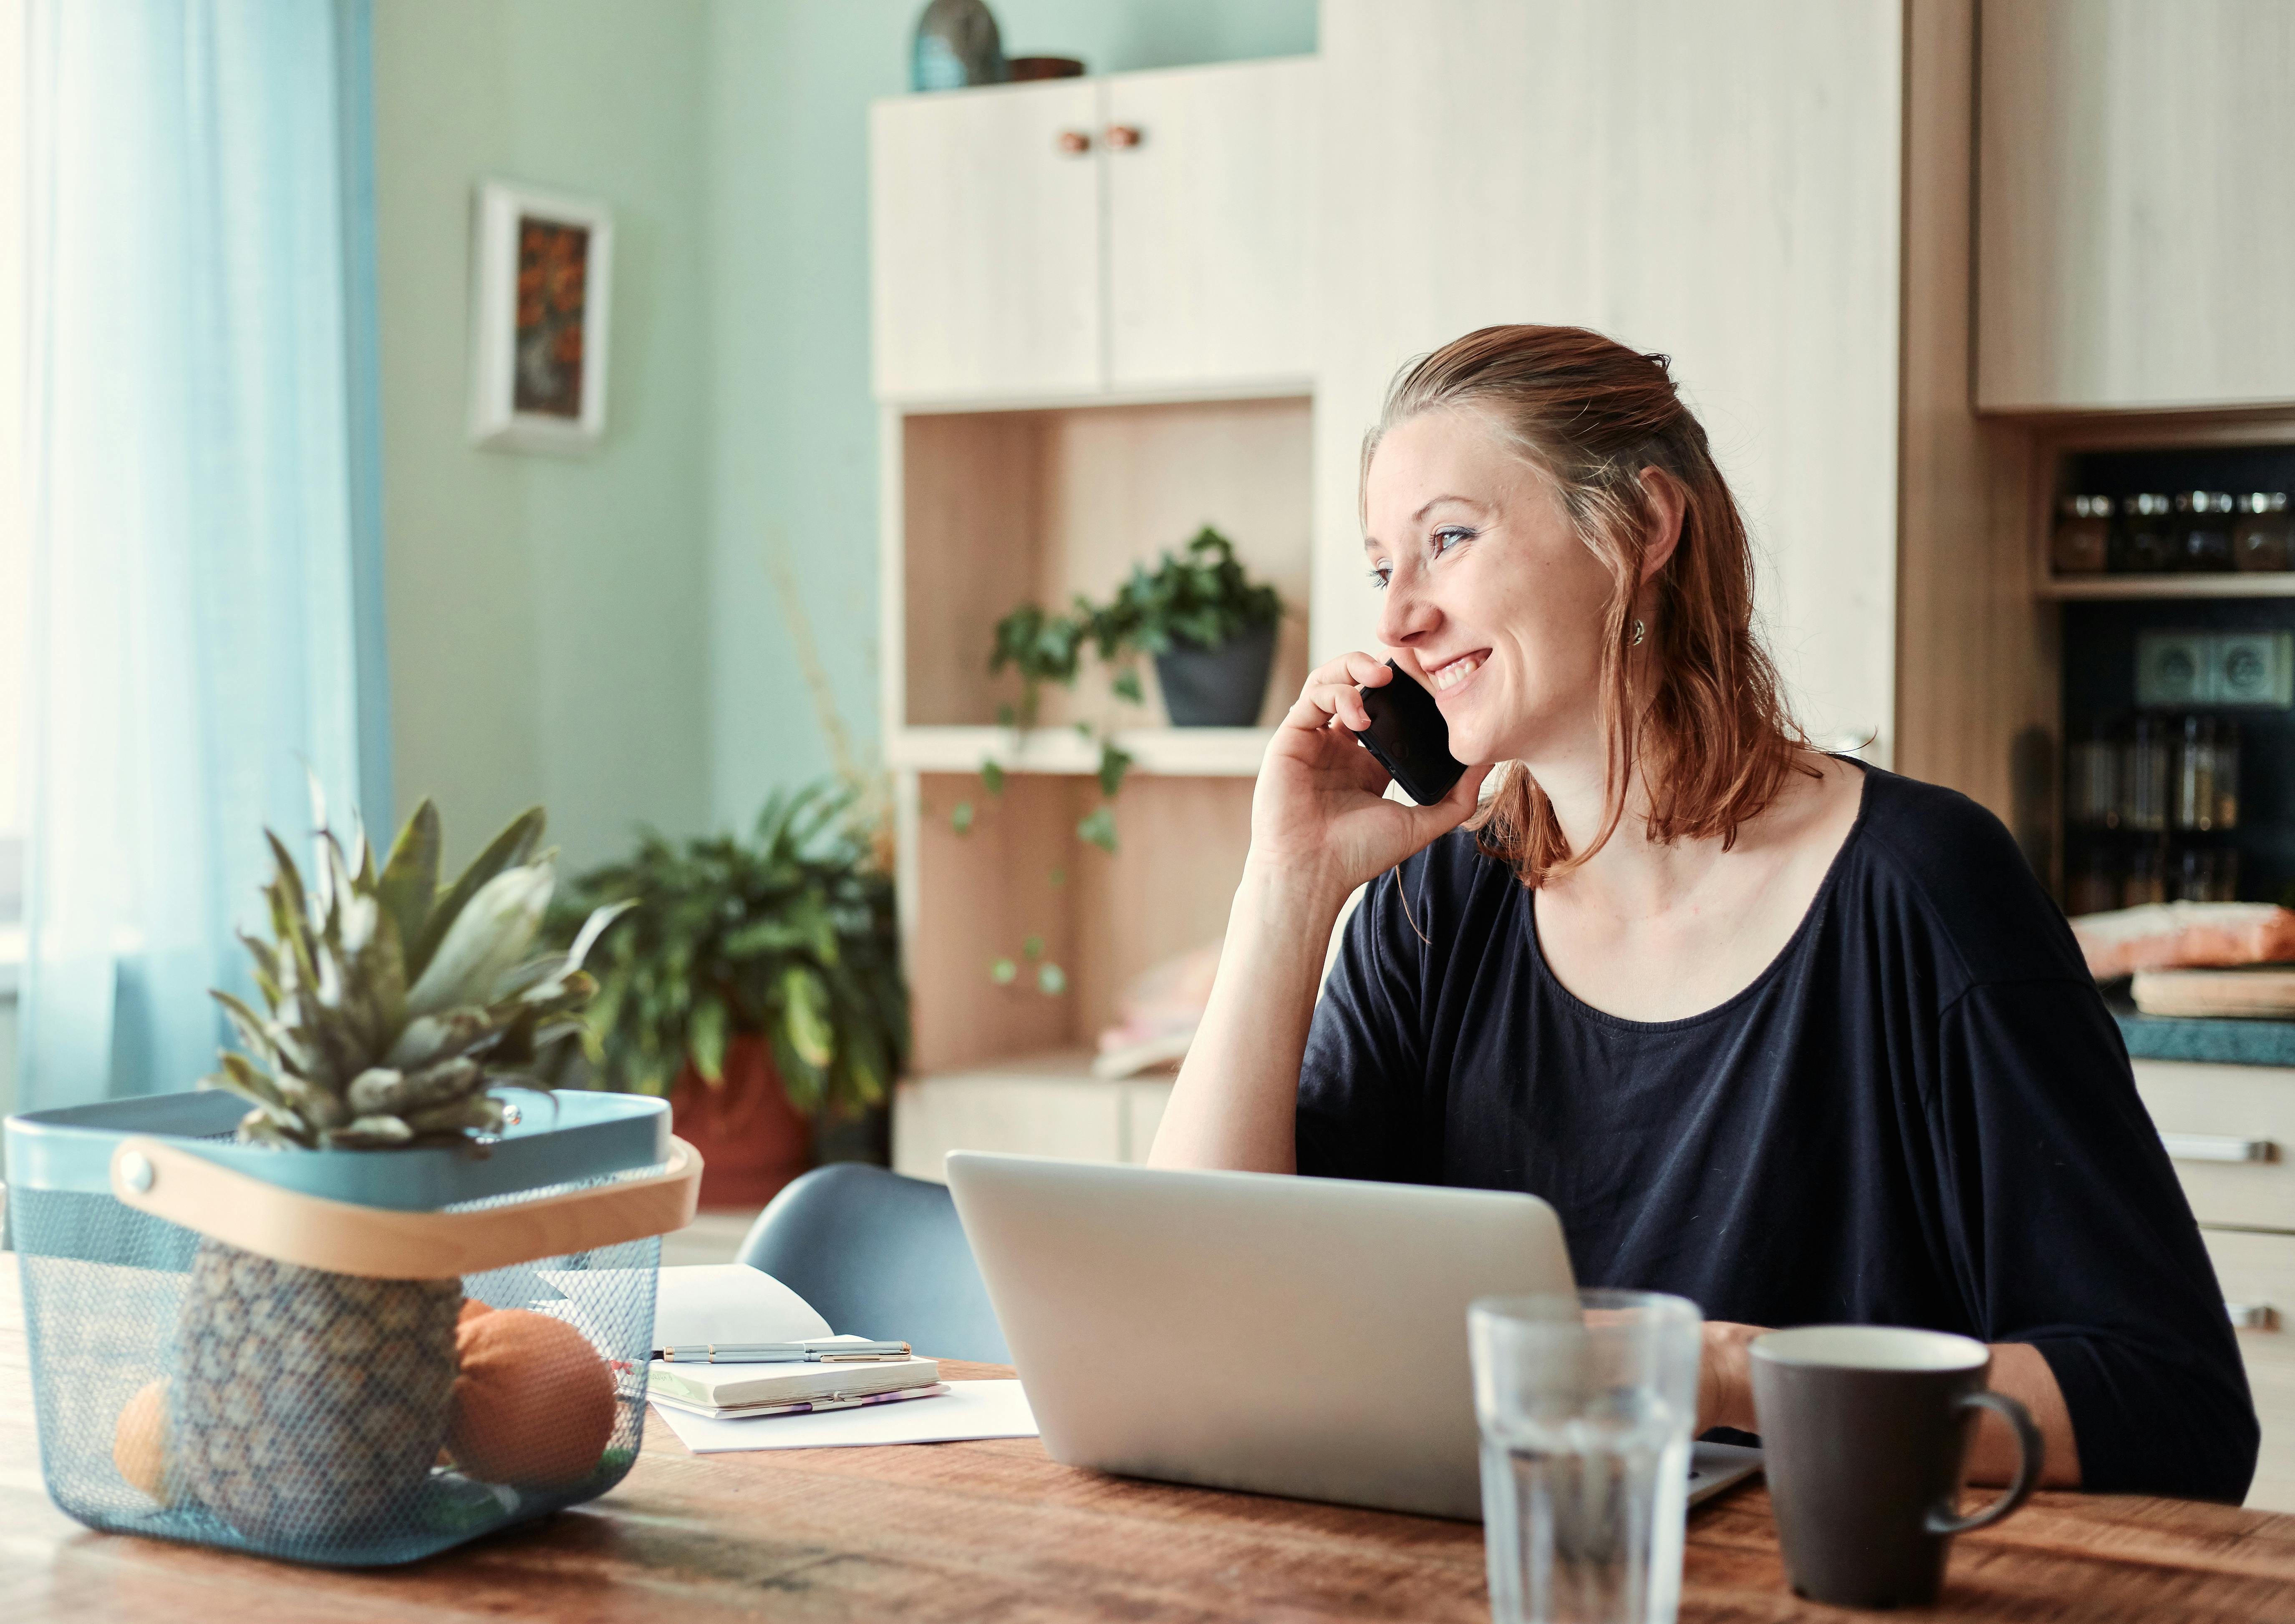 A happy woman talking on the phone | Source: Pexels